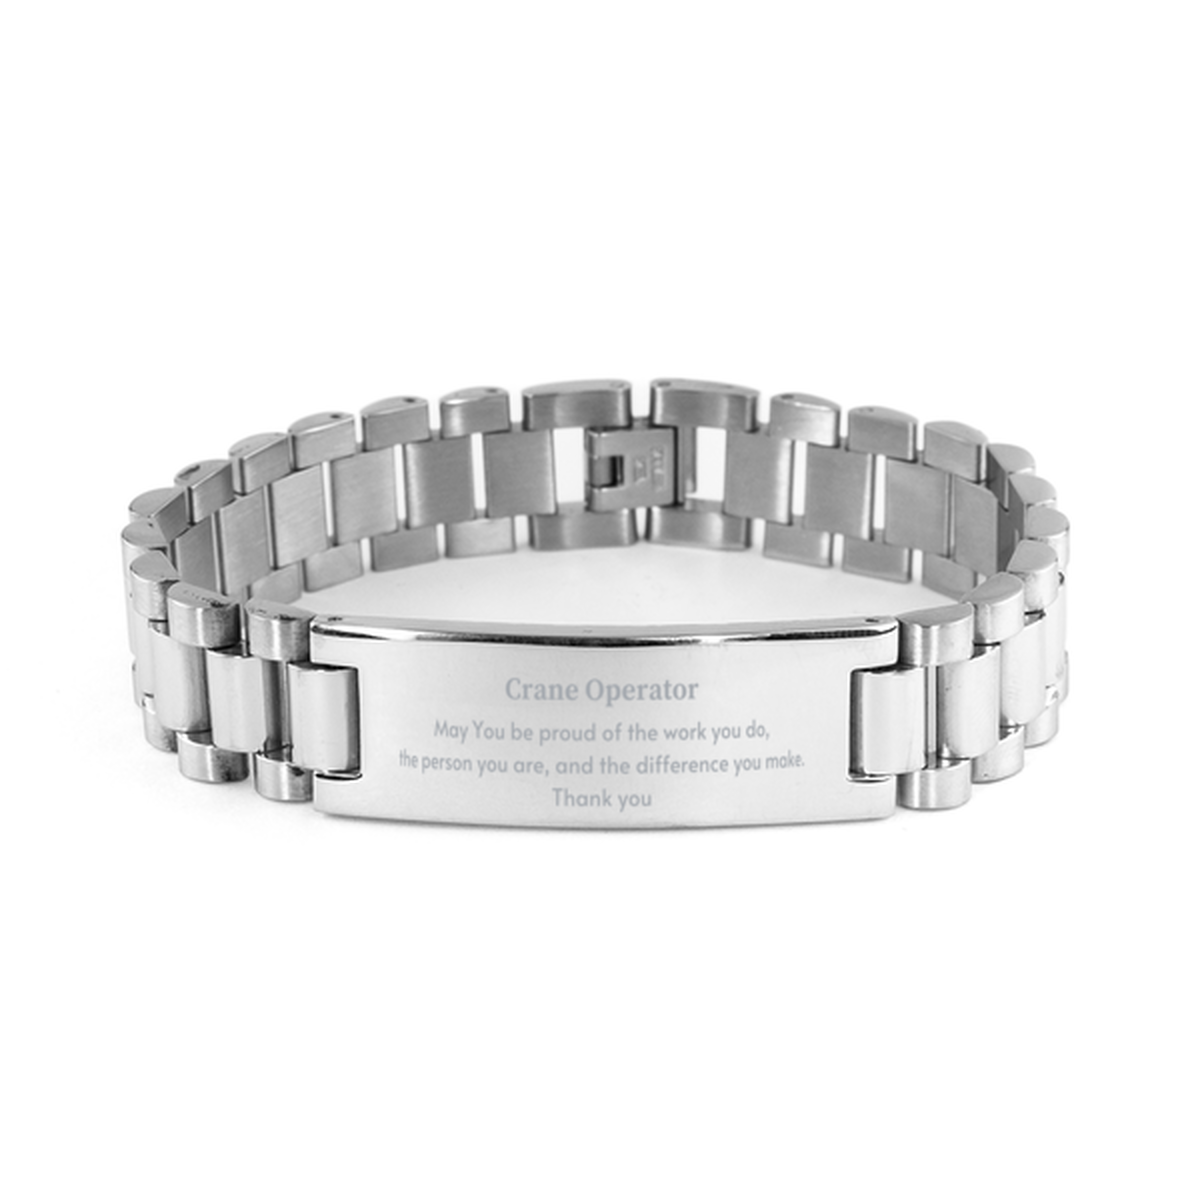 Heartwarming Ladder Stainless Steel Bracelet Retirement Coworkers Gifts for Crane Operator, Crane Operator May You be proud of the work you do, the person you are Gifts for Boss Men Women Friends